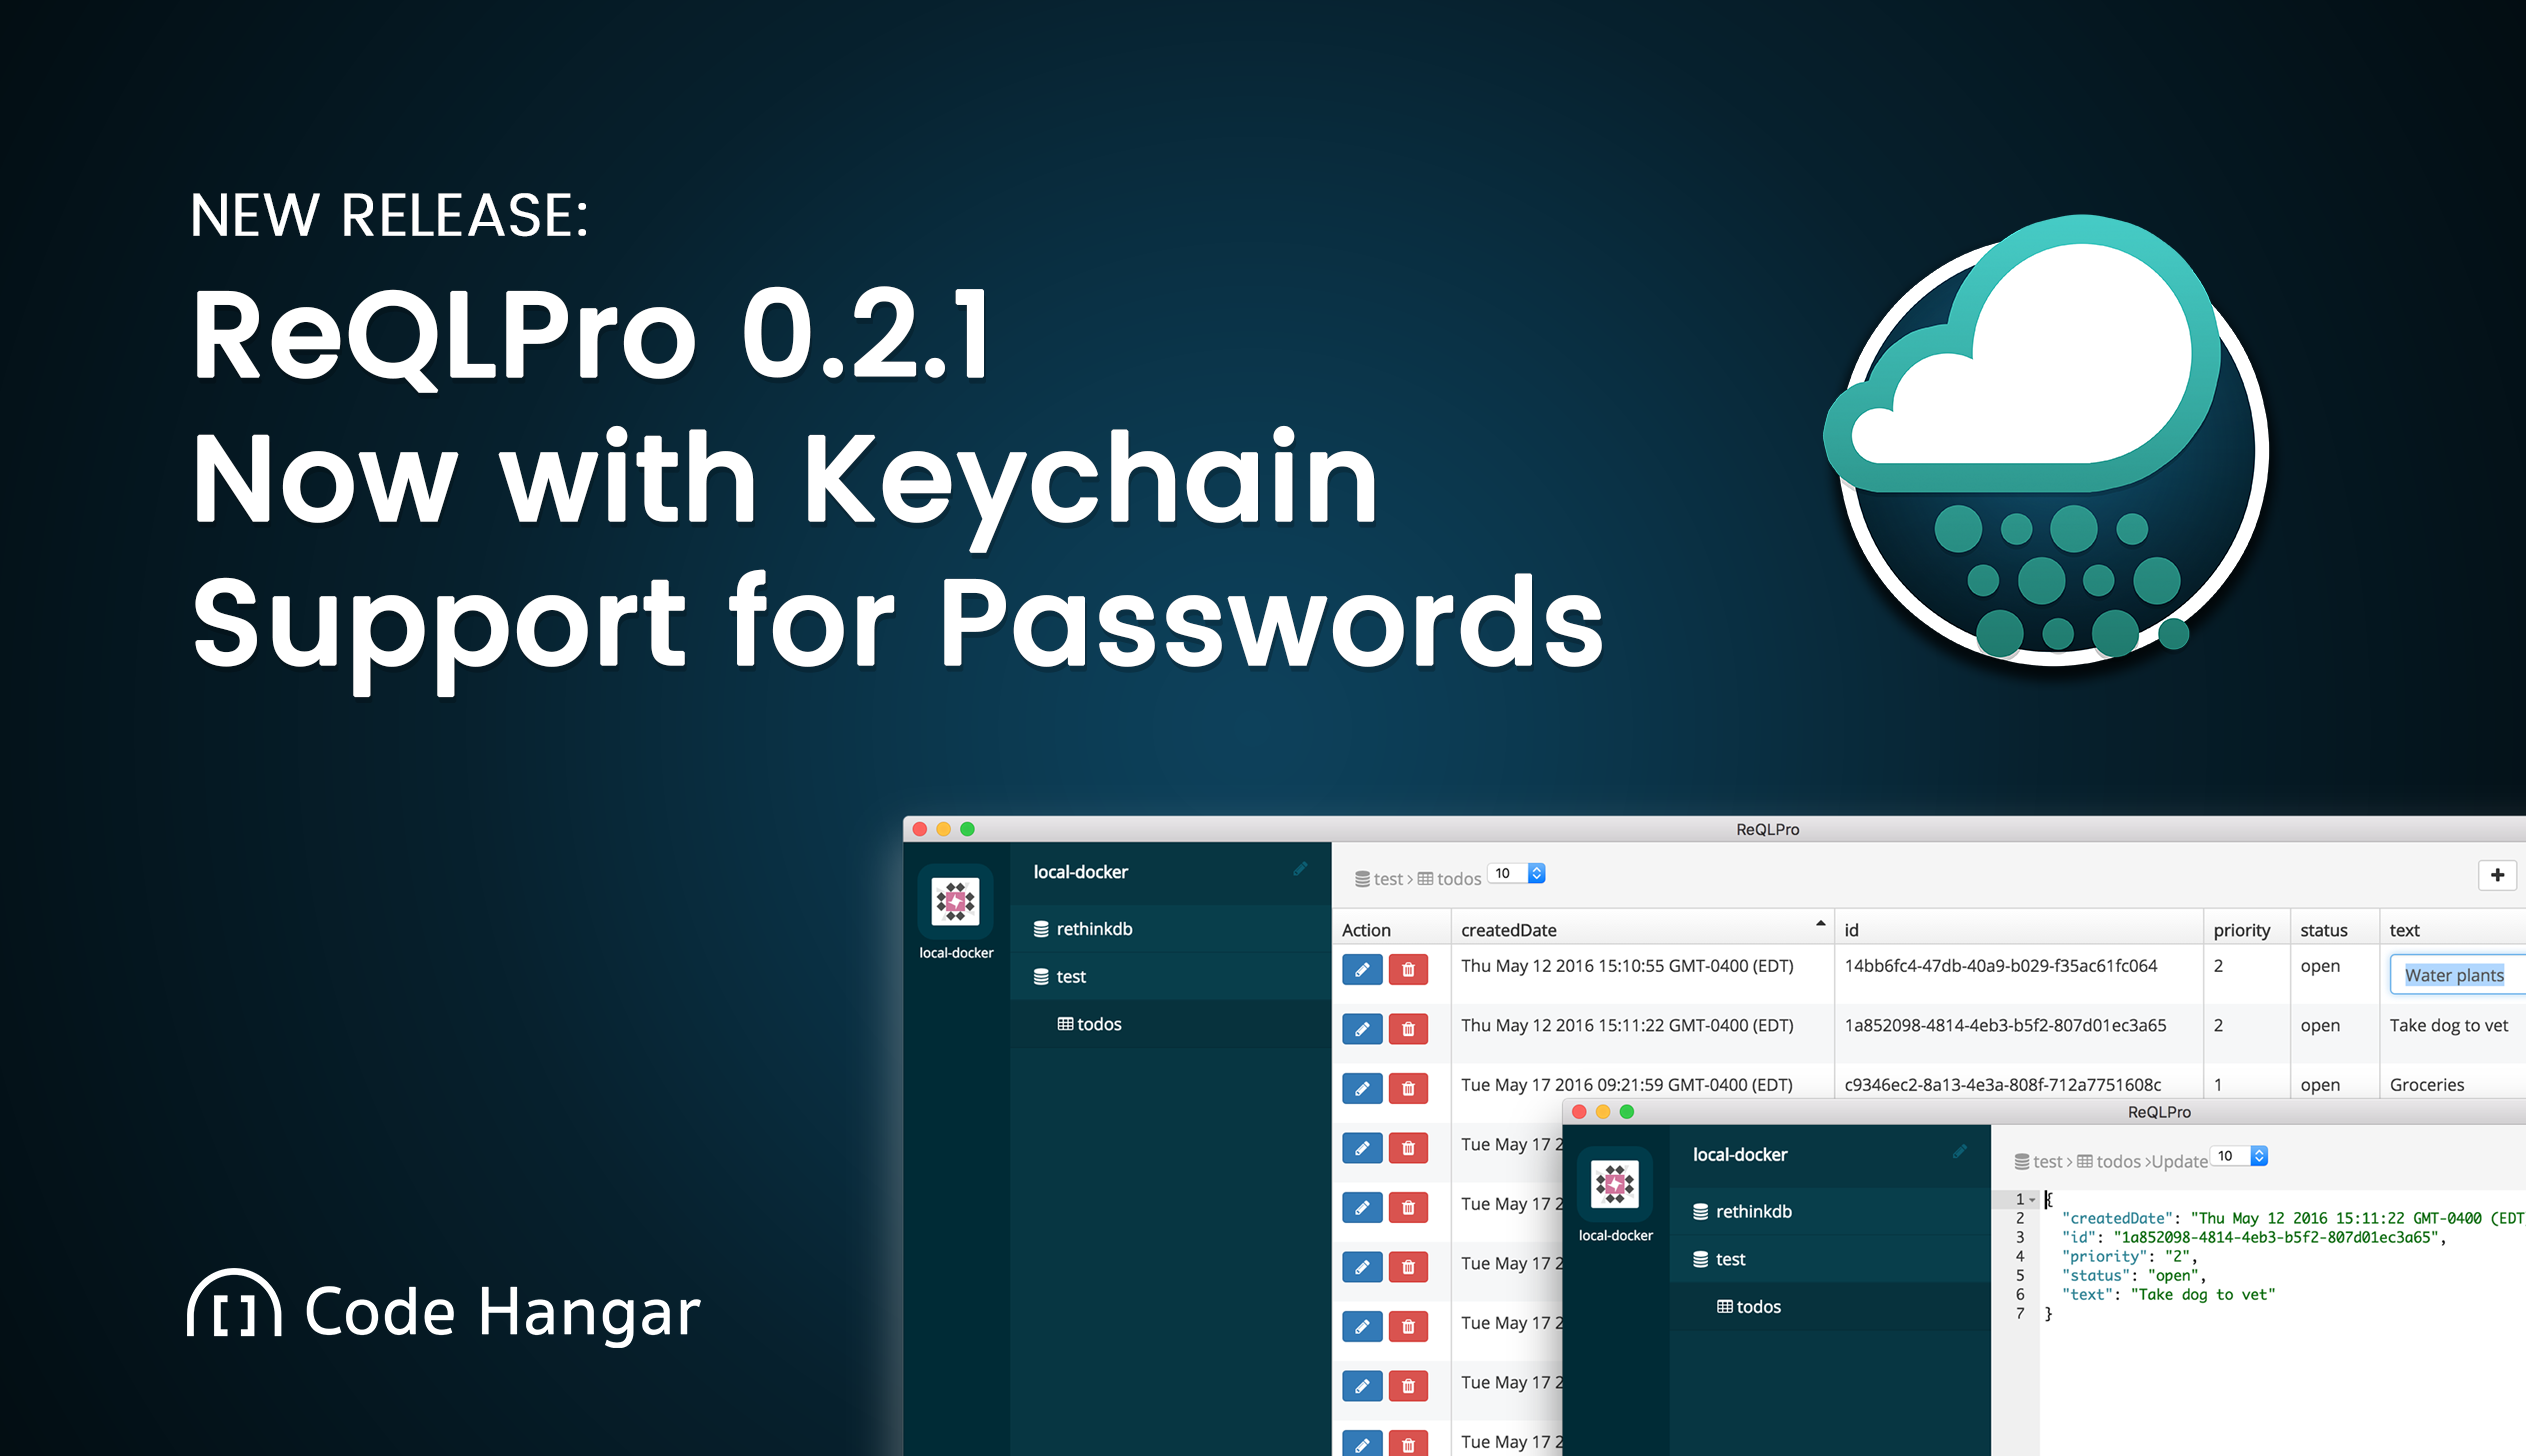 ReQLPro 0.2.1 Release Notes - Now with Keychain Support for Passwords